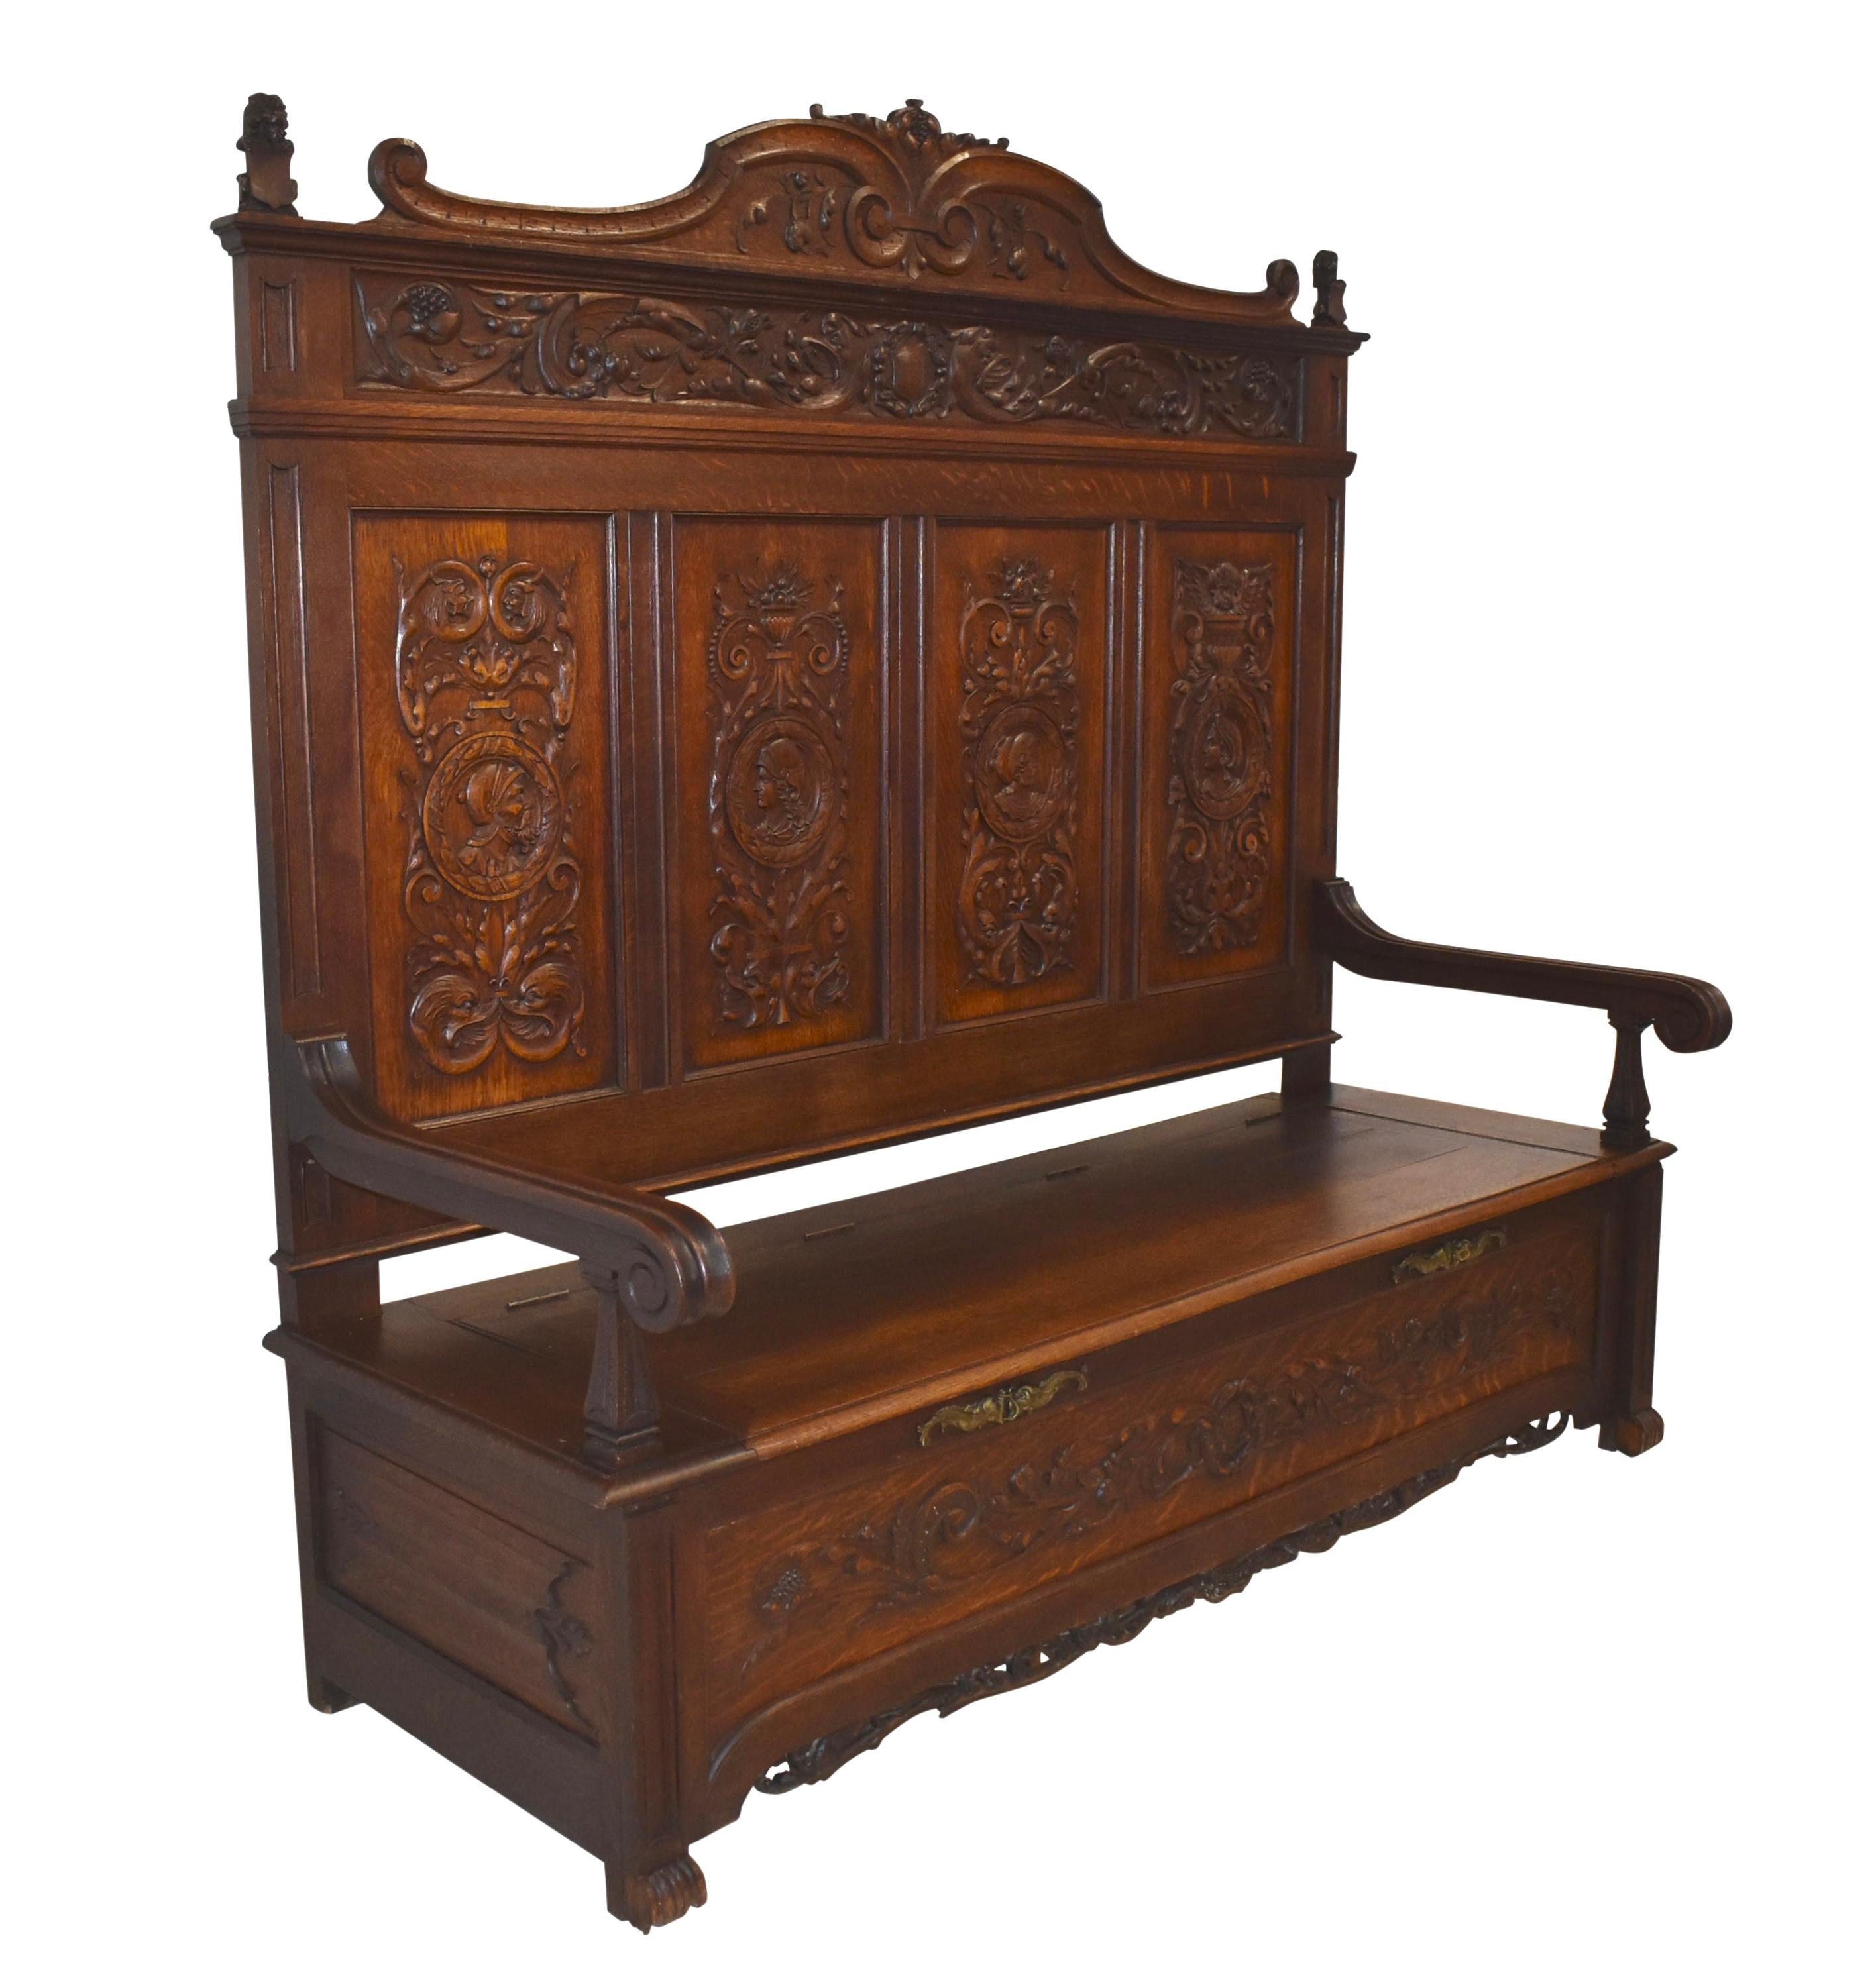 Showcasing the pattern of flecking and tight grain unique to quartersawn oak, this beautiful bench features elaborate carvings typical of late 19th century Belgium furniture. Its high back is carved with the profile of one character on each of its